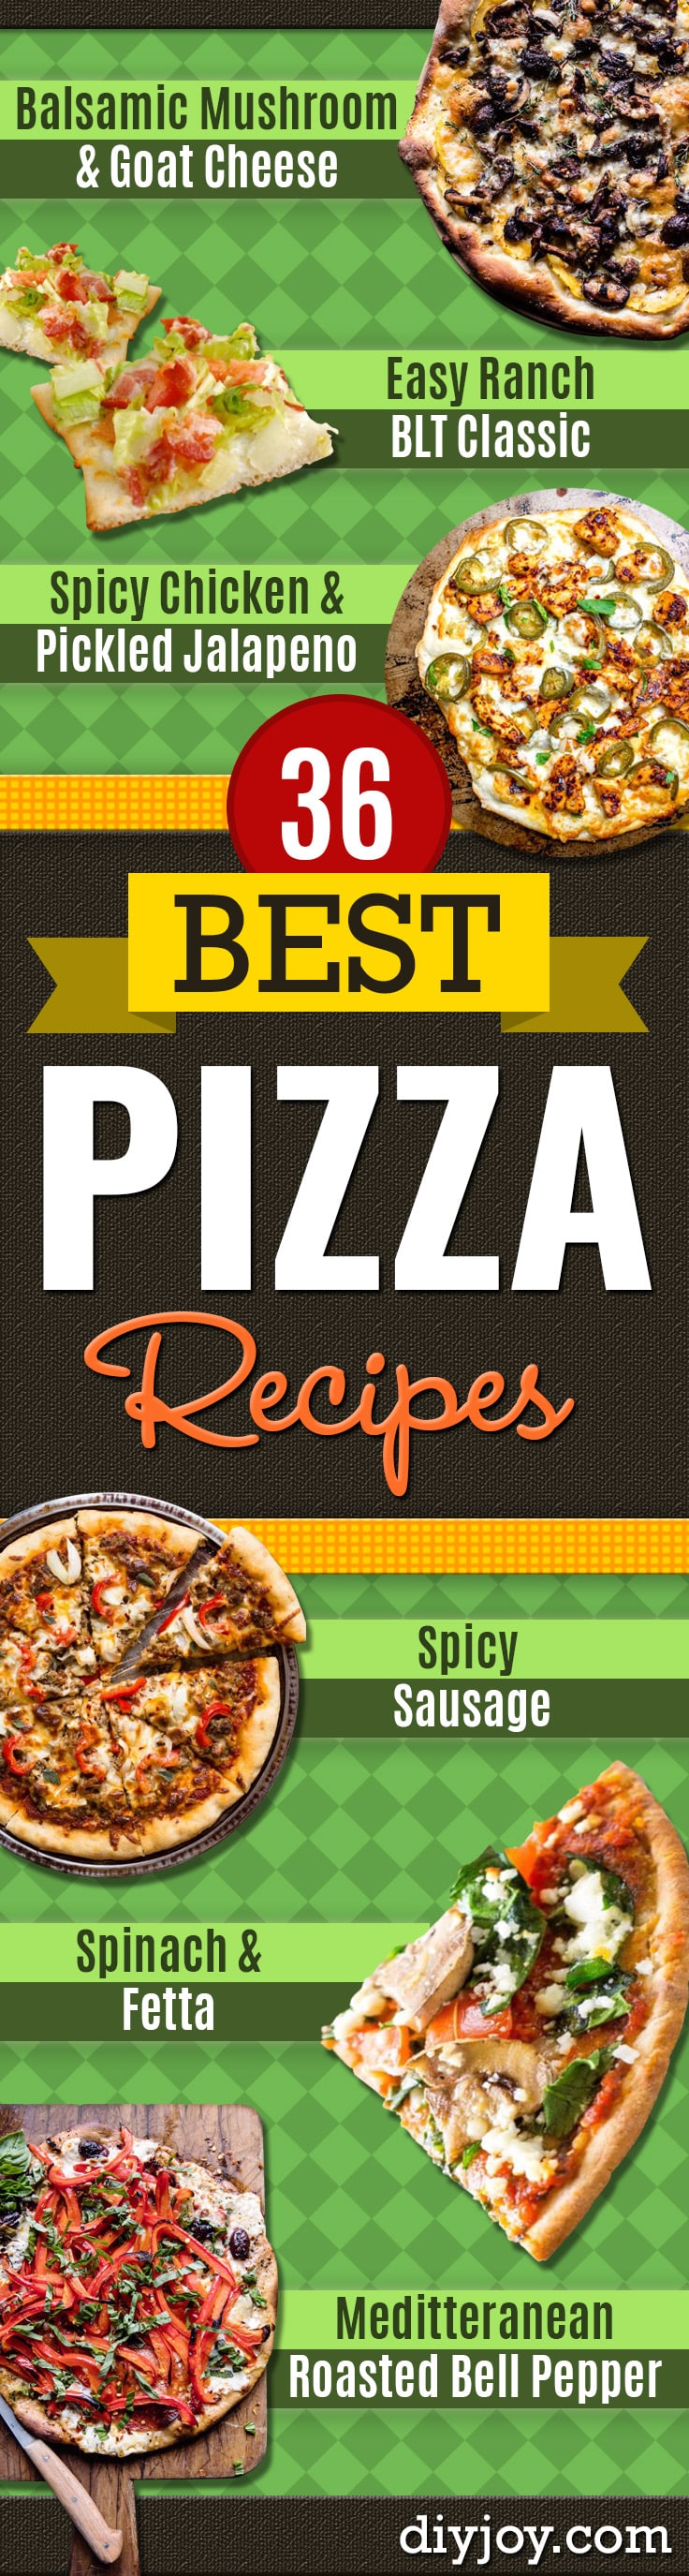 Best Pizza Recipes - Homemade Pizza Recipe Ideas for Healthy, Easy Dinner, Lunch and Snacks - How To Make Pizza Dough at Home - Step by Step Tutorials for Varieties with Pepperoni, Gourmet and Unique Tips With Pillsbury Biscuits, for Kids, With Chicken and French Bread - Thin Crust and Deep Dish Pizzas